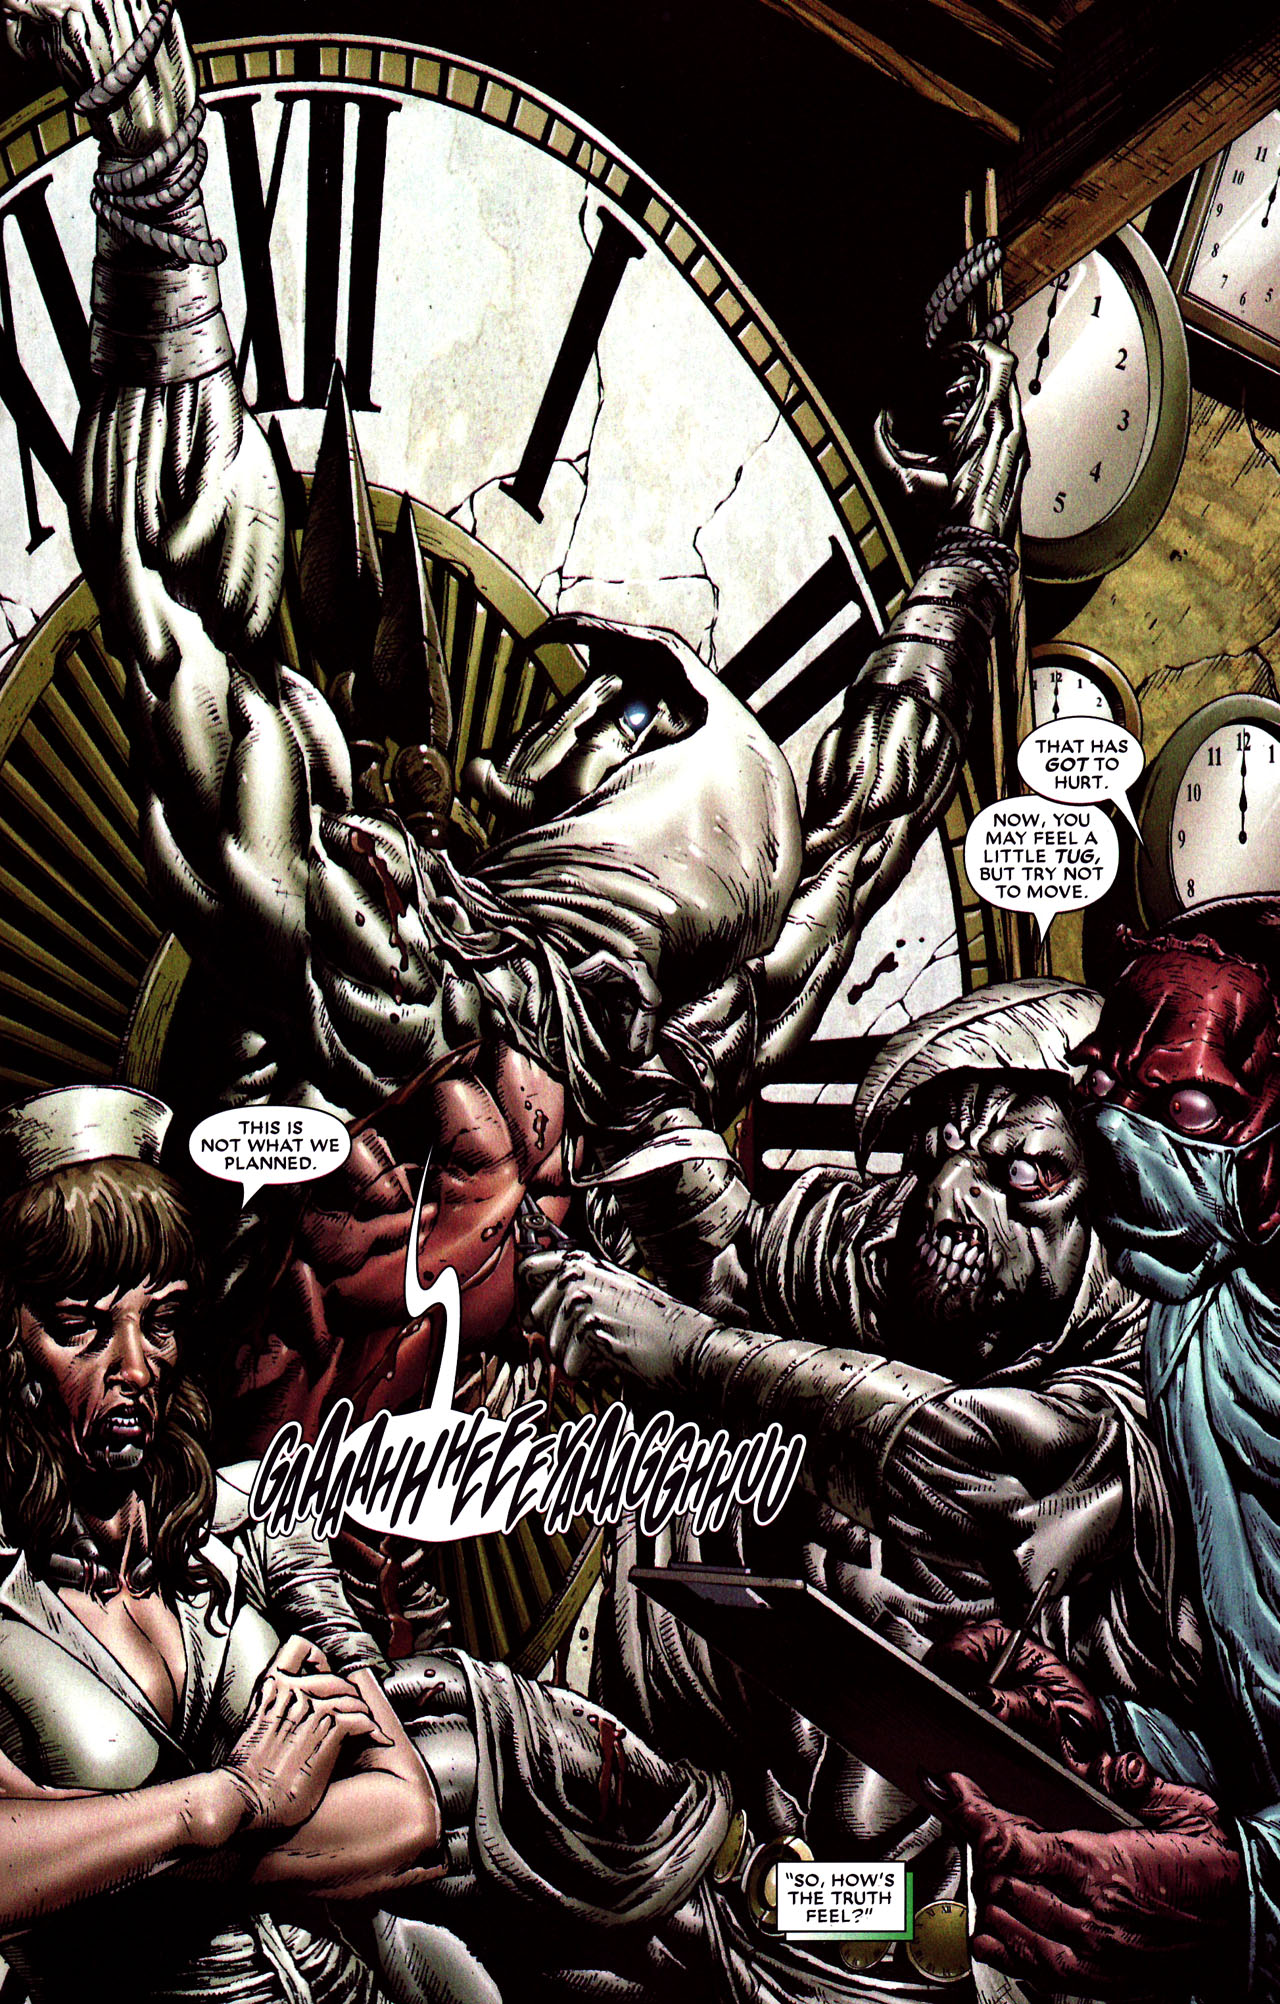  Moon Knight #12 - Midnight Sun, Chapter Six: This Trap, My Body